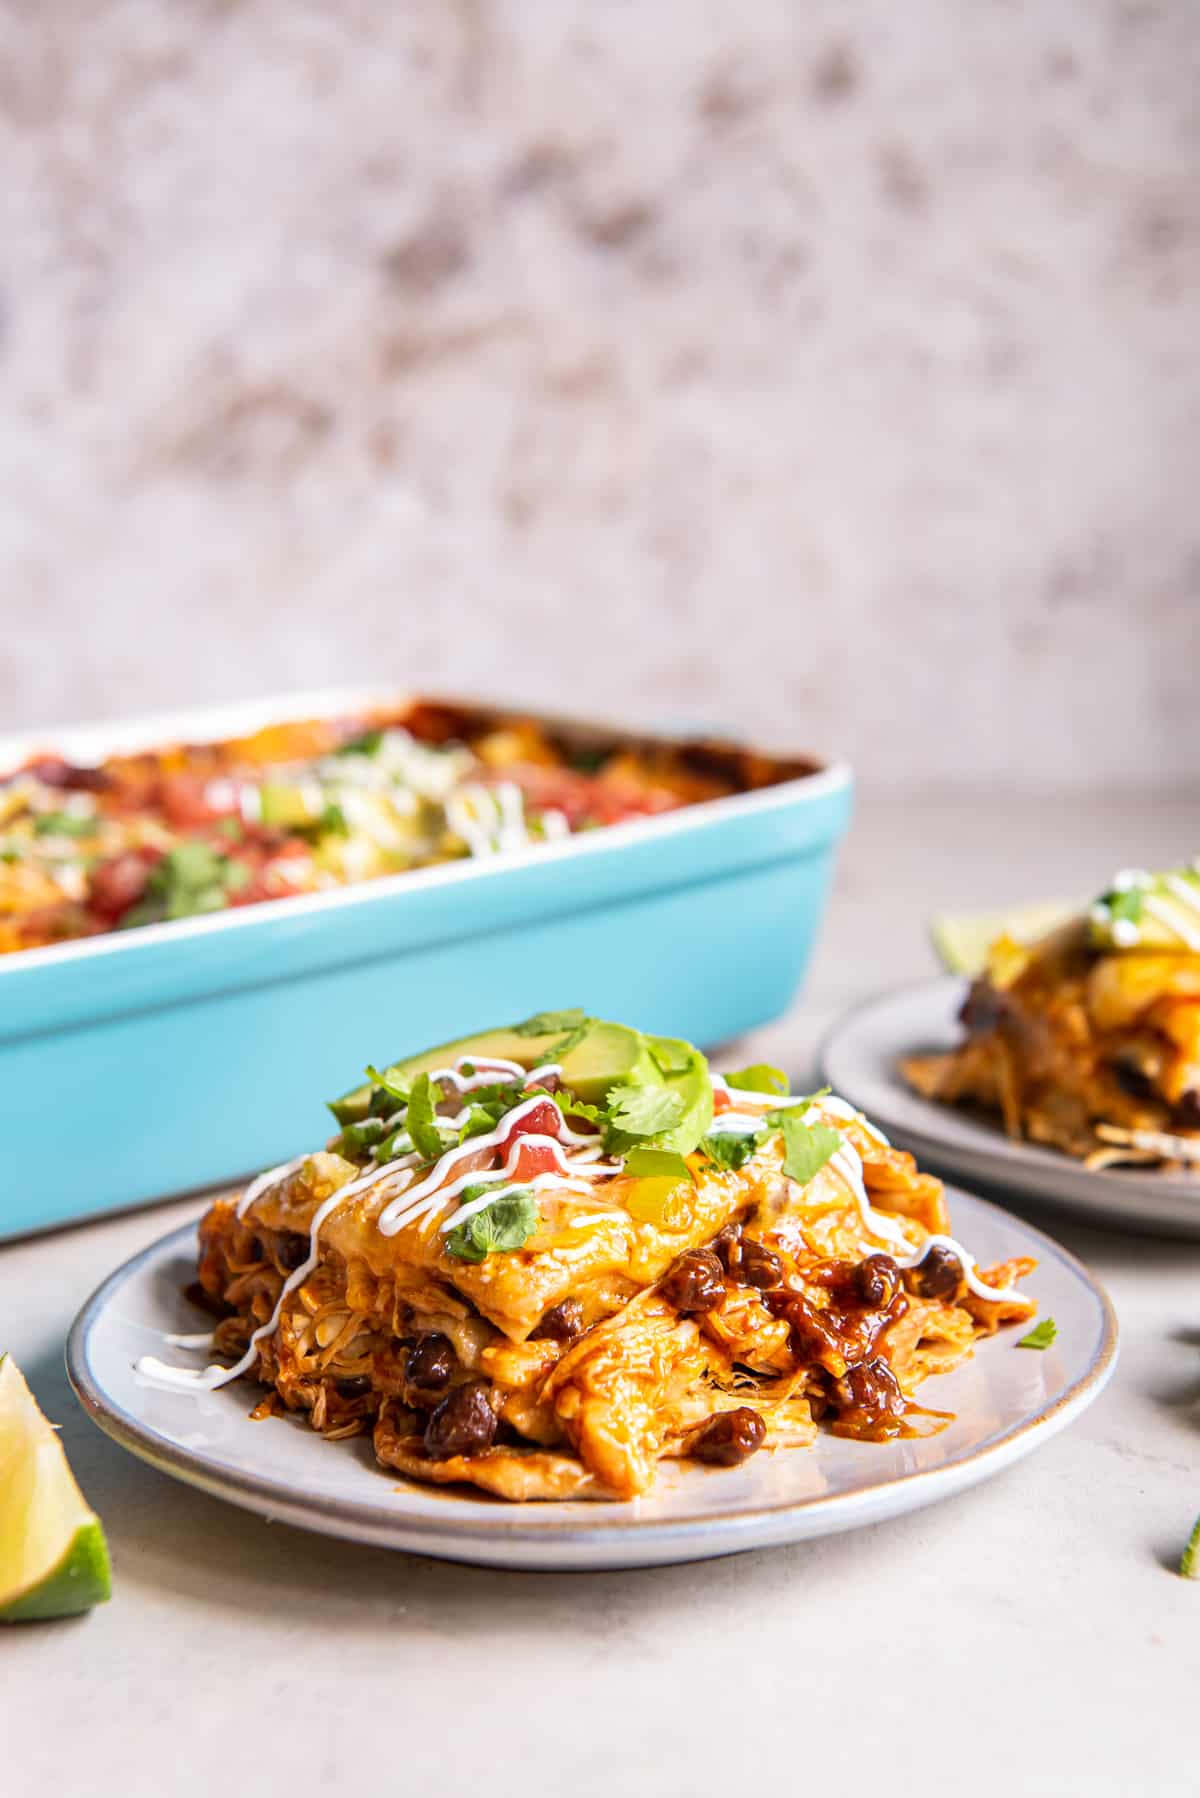 A serving of chicken enchilada casserole on a white plate with a blue casserole dish in the background.